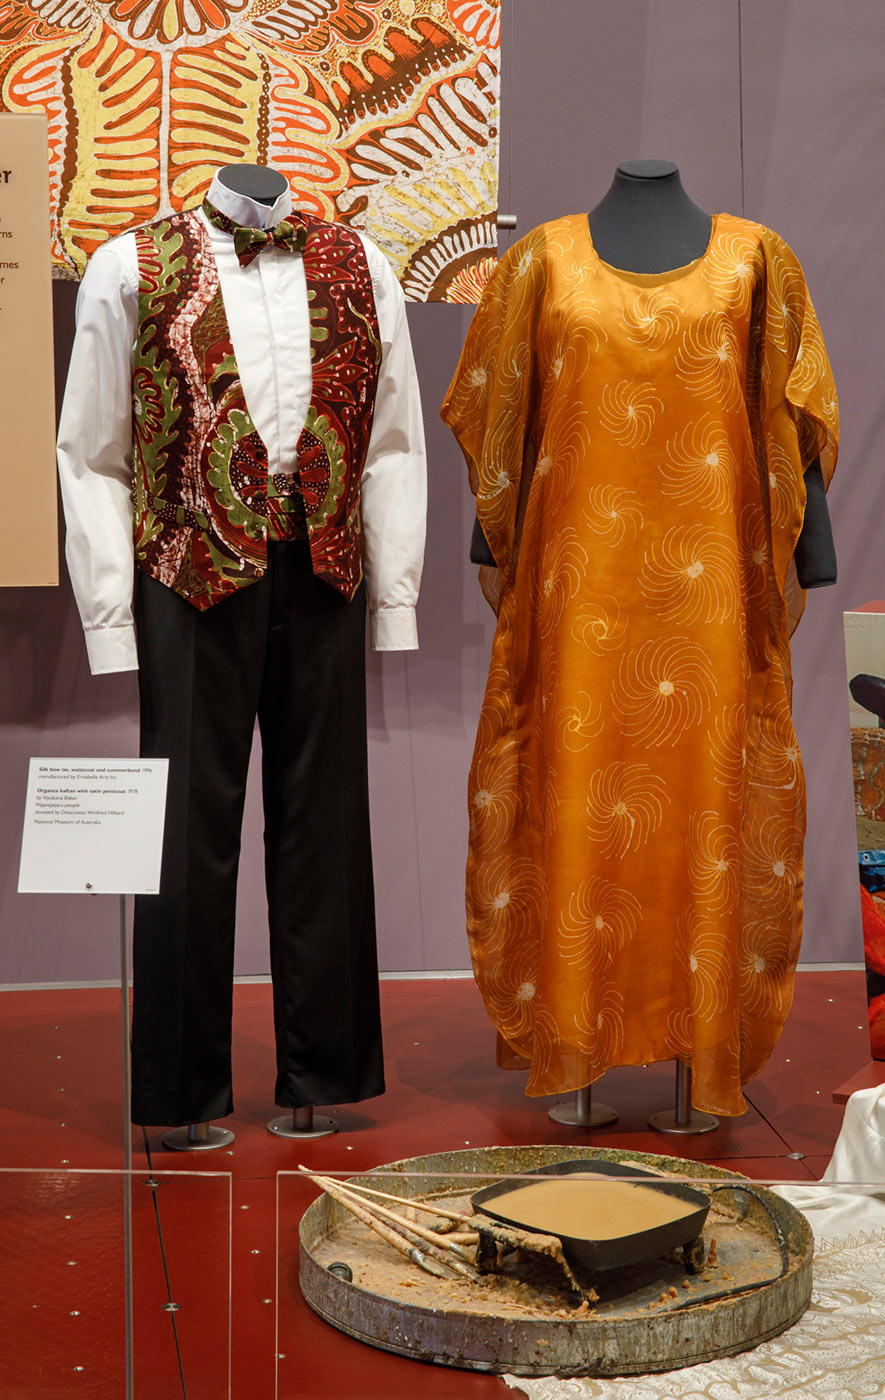 Museum display showing two mannequins. On the left, one has black pants, white shirt and a brightly coloured silk waistcoat. The second wears a bright orange kaftan. - click to view larger image